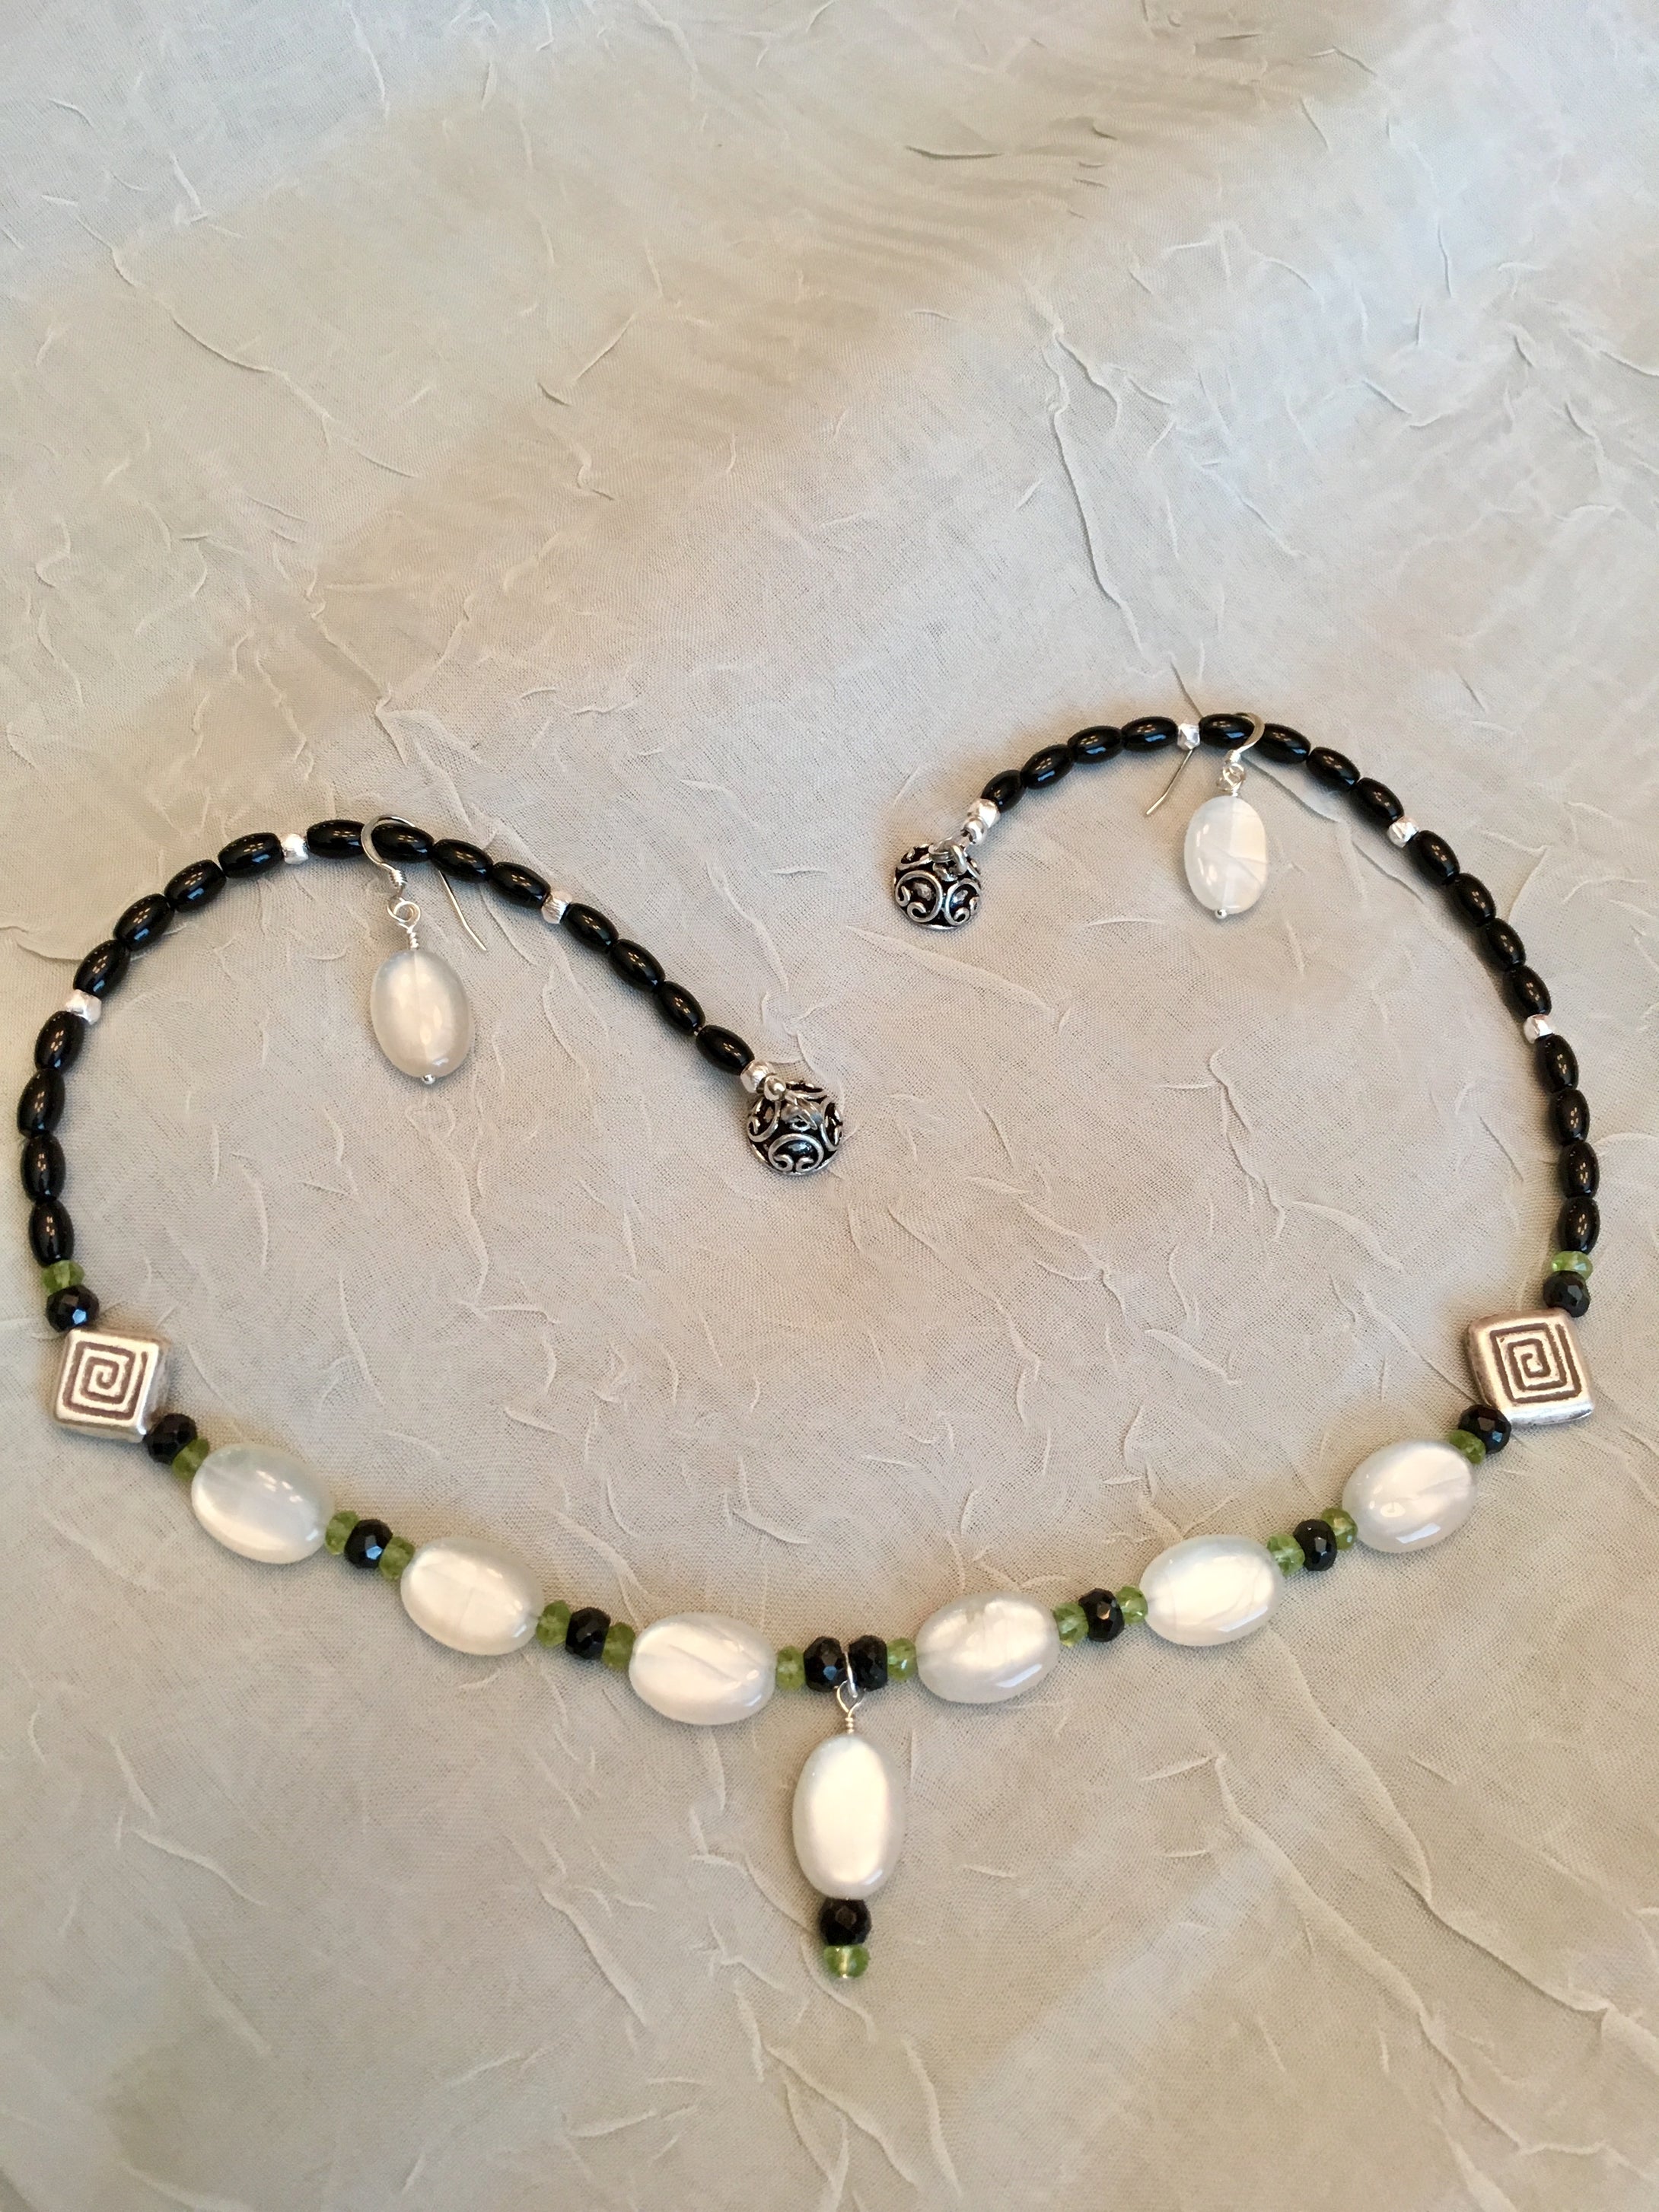 White Moonstone, Hill Tribe Silver, Peridot, Black Onyx, Spinel, Sterling Silver.  17